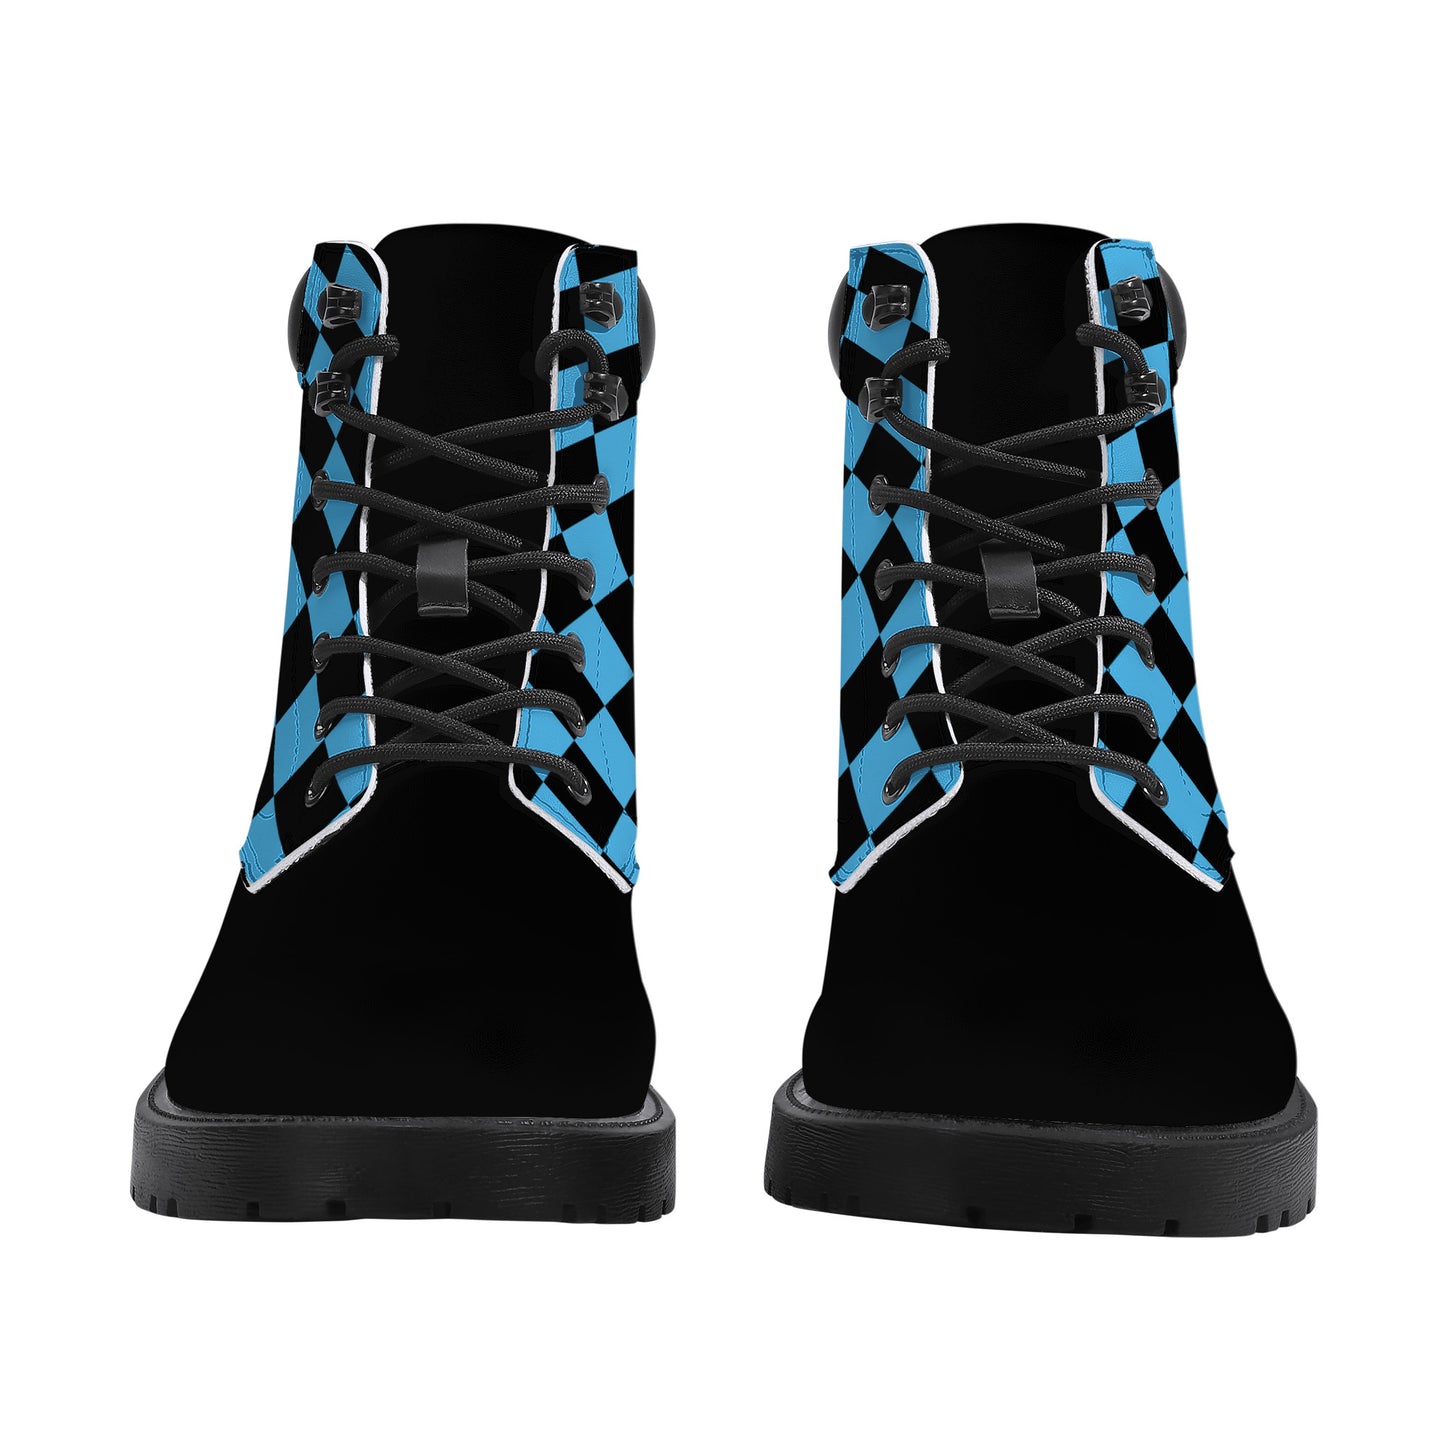 Unisex Synthetic Leather Boots With Cuff - Blue Checkers